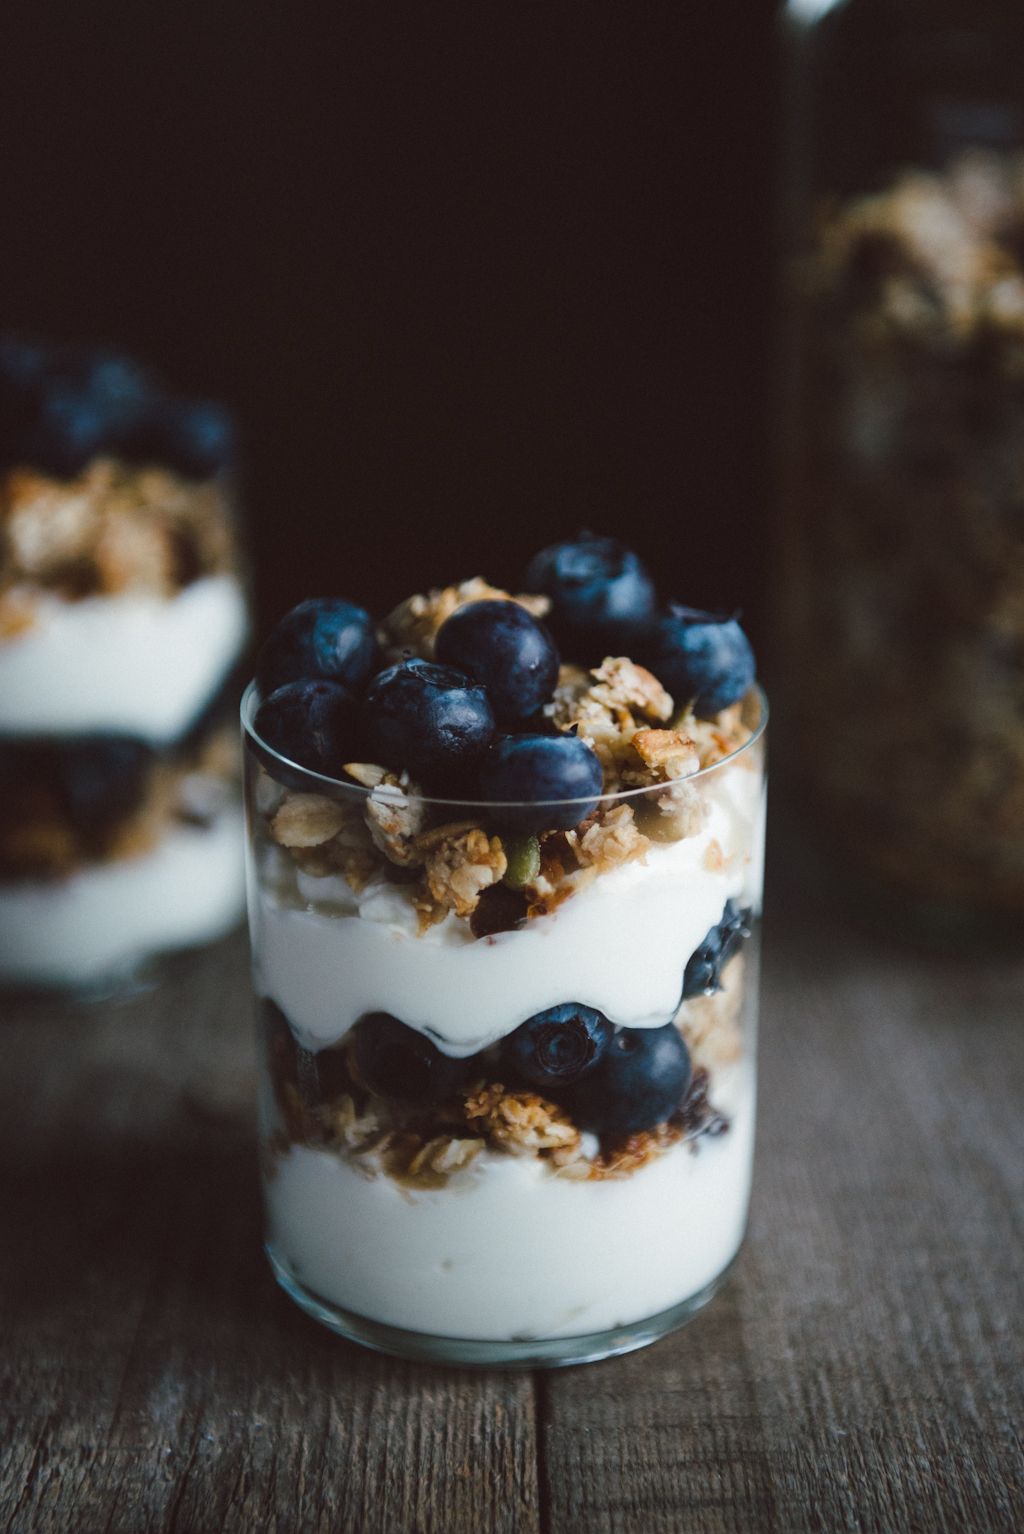 Granola by Babes in Boyland